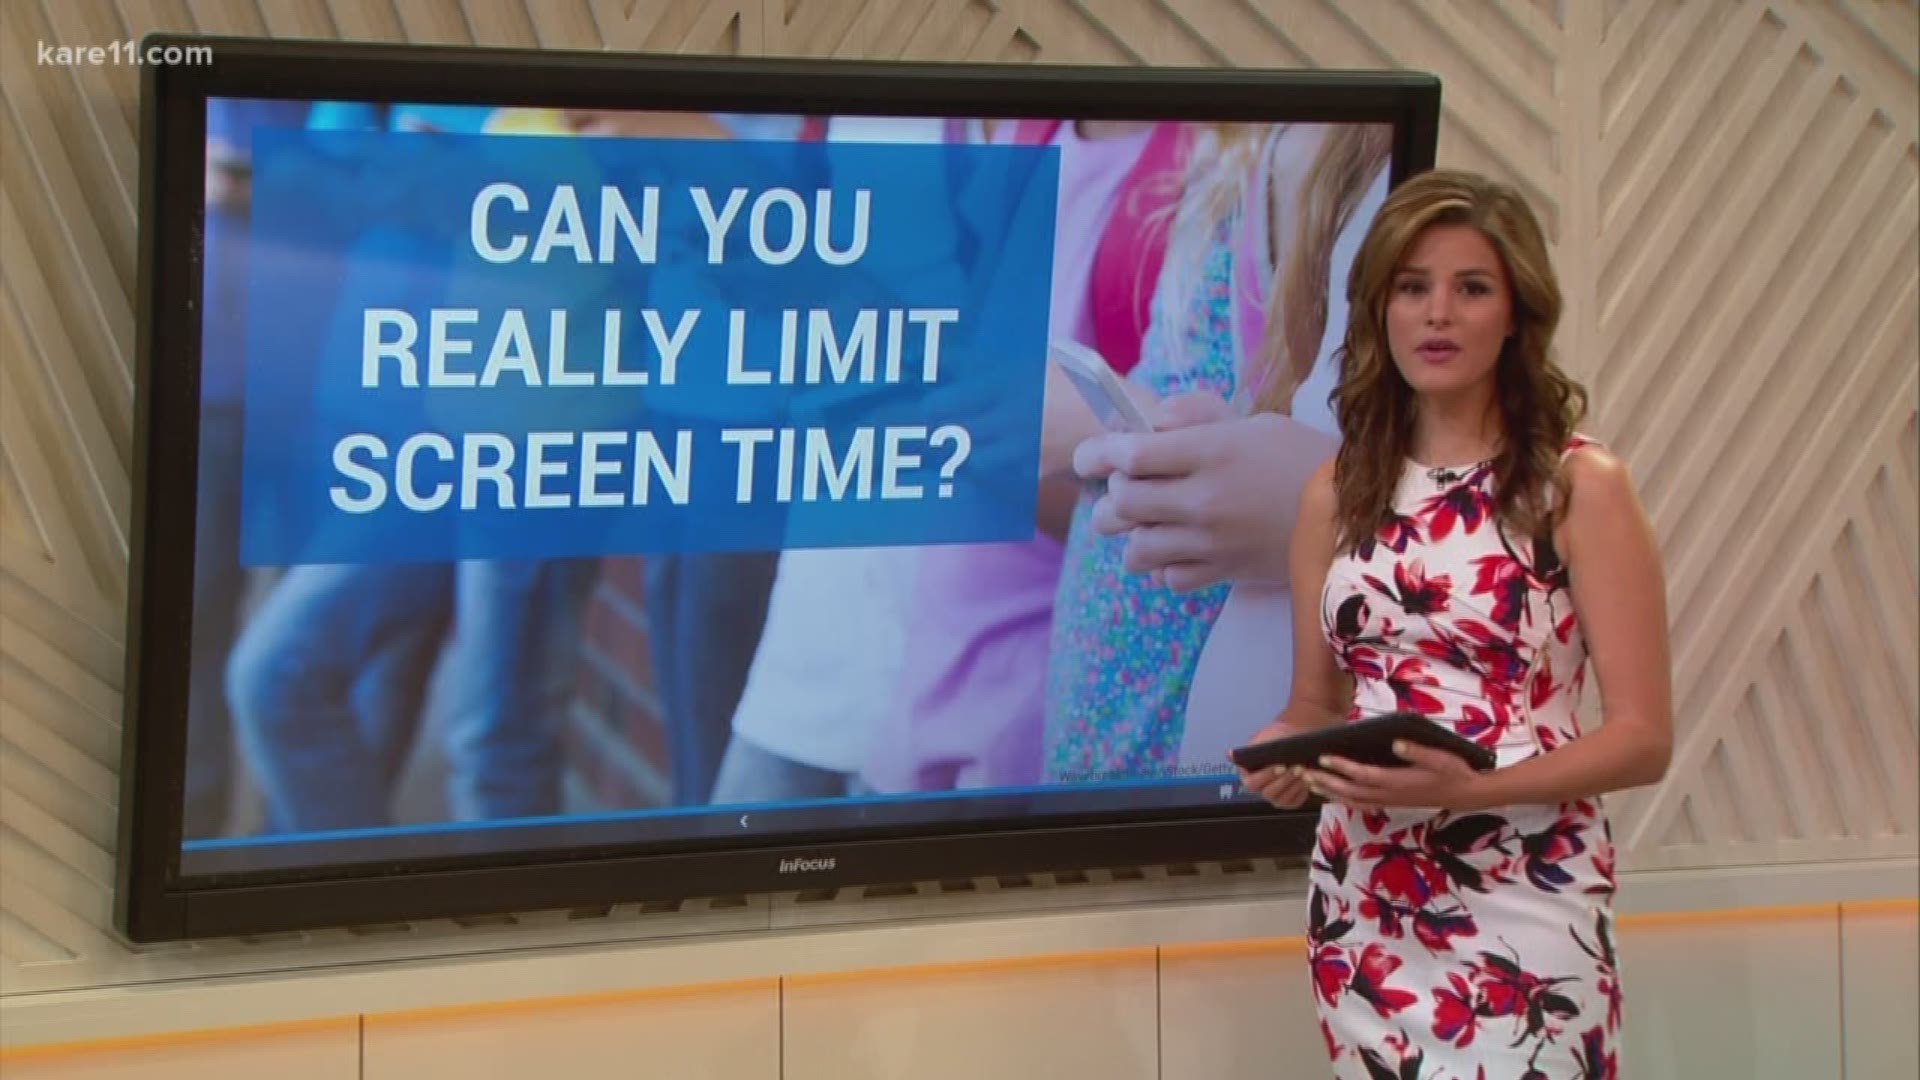 A new study recommends that everyone limit their screen time to two hours a day or less. But is that a reasonable expectation?